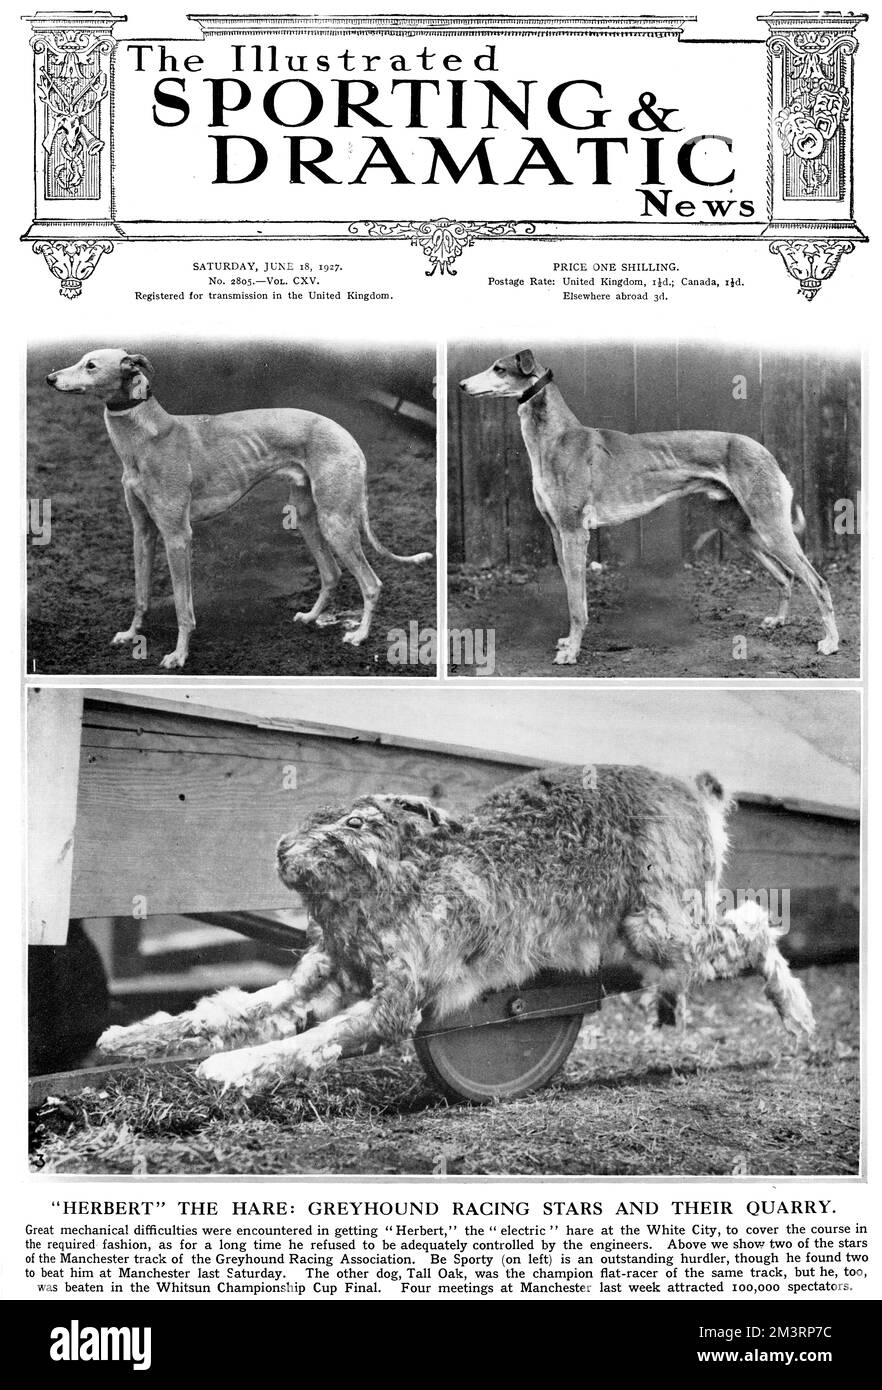 Front cover of The Illustrated Sporting and Dramatic News reporting on the new sport of greyhound racing.  Top left photograph shows Be Sporty, an outstanding hurdler and top right shows Tall Oak, a champion flat racer.  Bottom picture shows Herbert, the electric hare at White City stadium, which apparently was experiencing some technical difficulties.  The magazine comments on the rising popularity of the spectator sport noting, &quot;Four meetings at Manchester last week attracted 100,000 spectators.&quot;     Date: 1927 Stock Photo